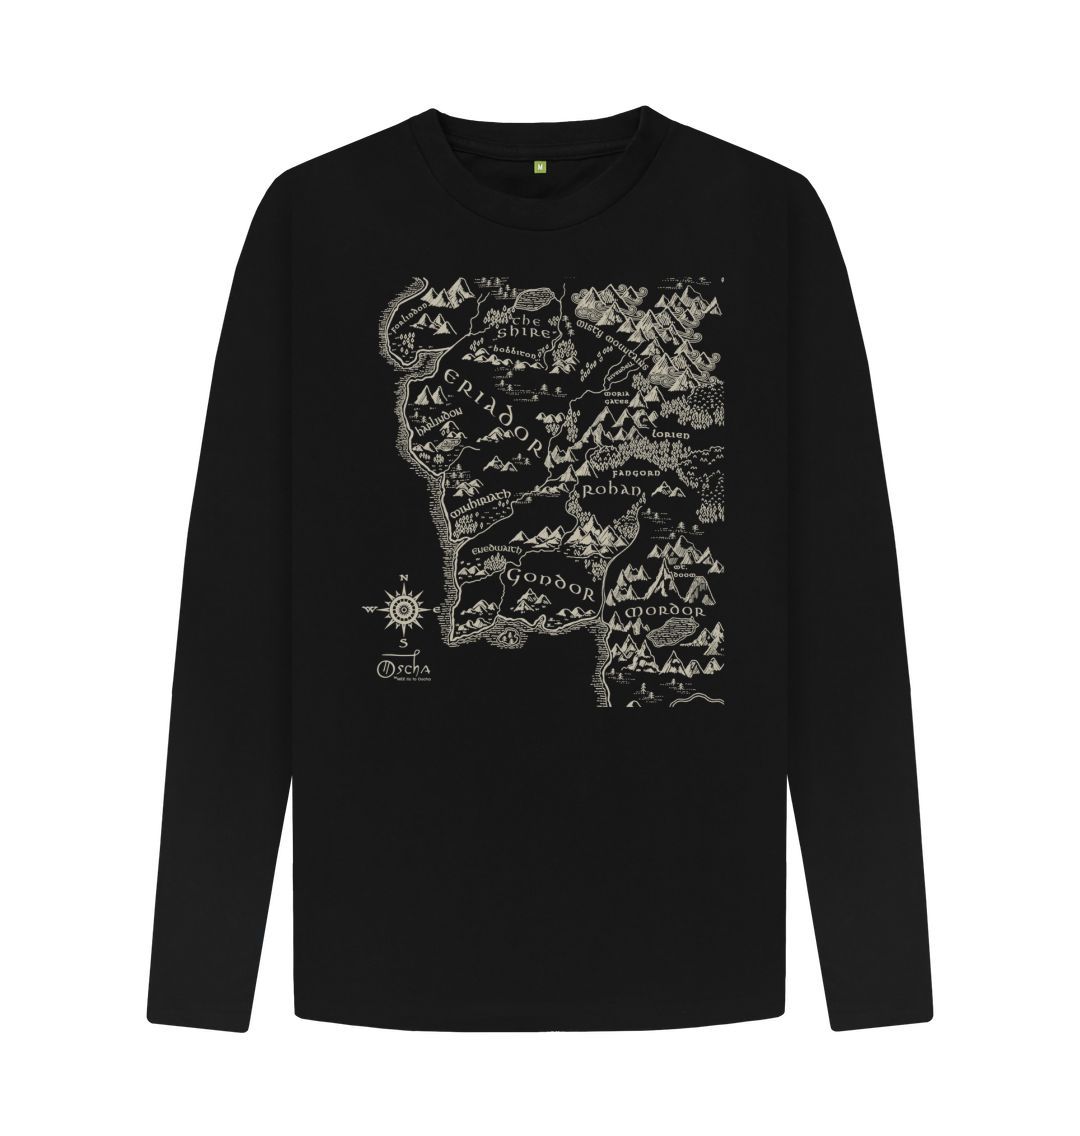 Black Realm of MIDDLE-EARTH\u2122 Long Sleeved T-Shirt